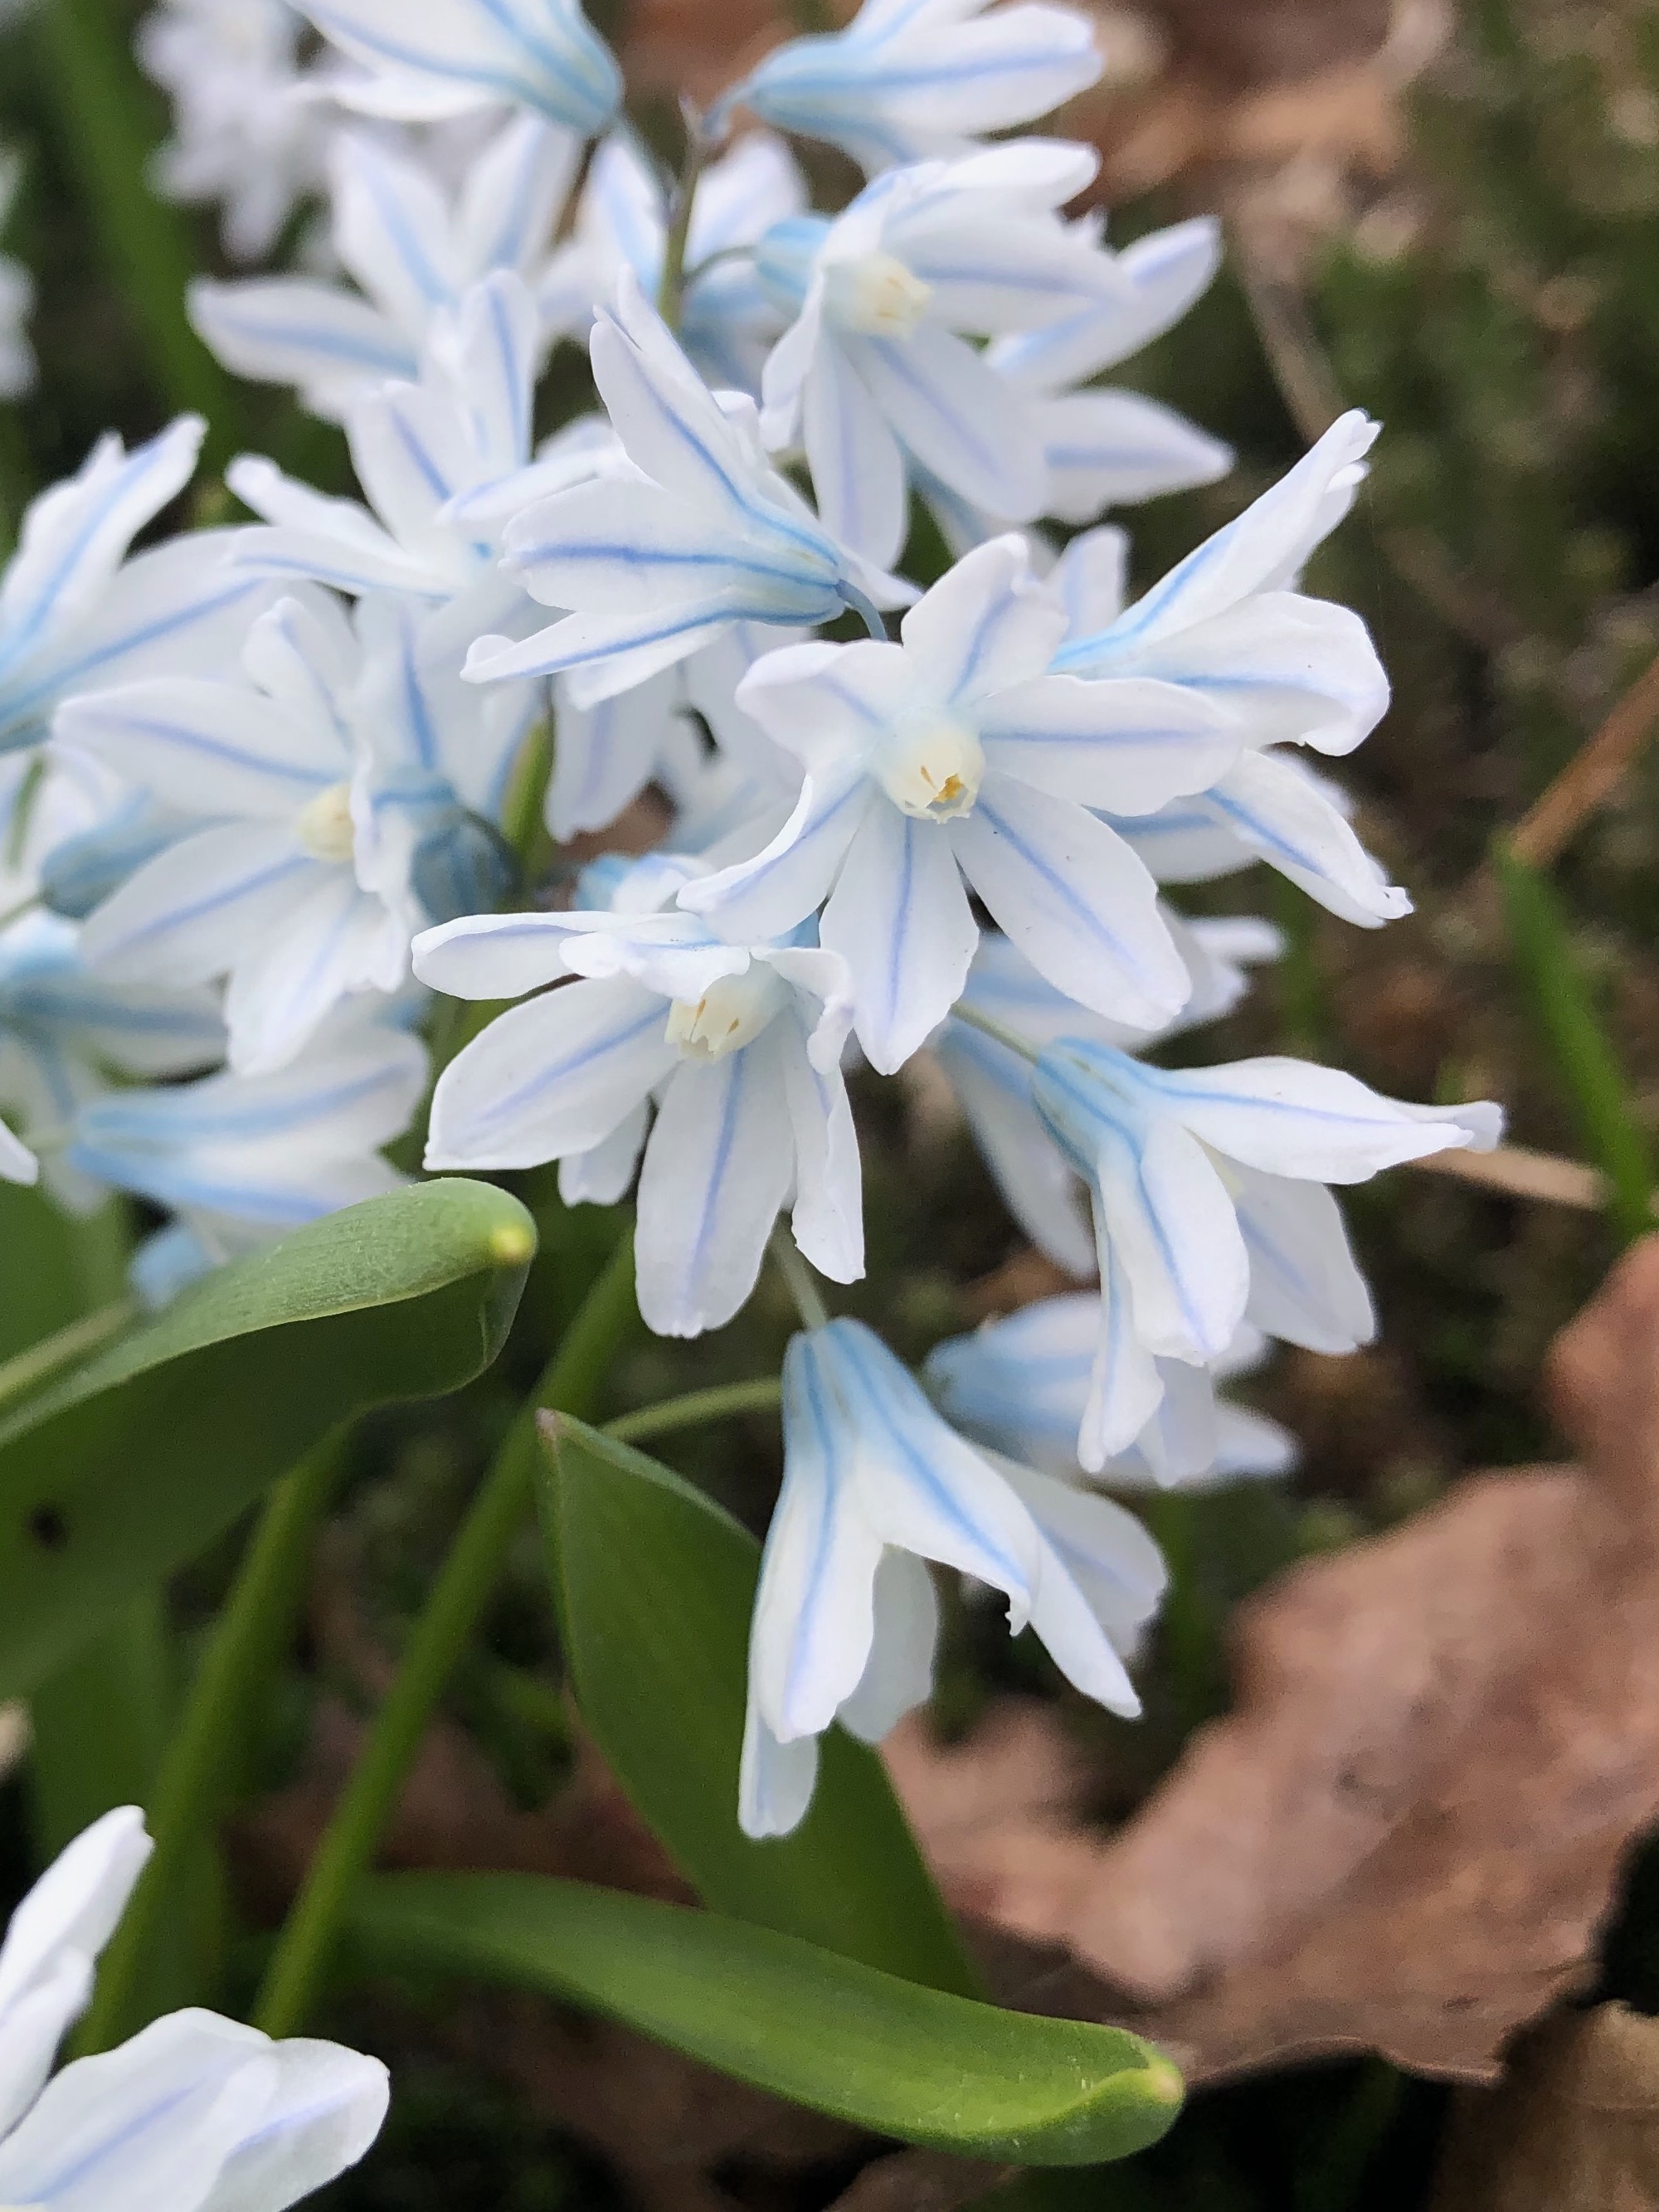 Striped Squill in yard on Nakoma Road in Madison, Wisconsin on April 6, 2021.